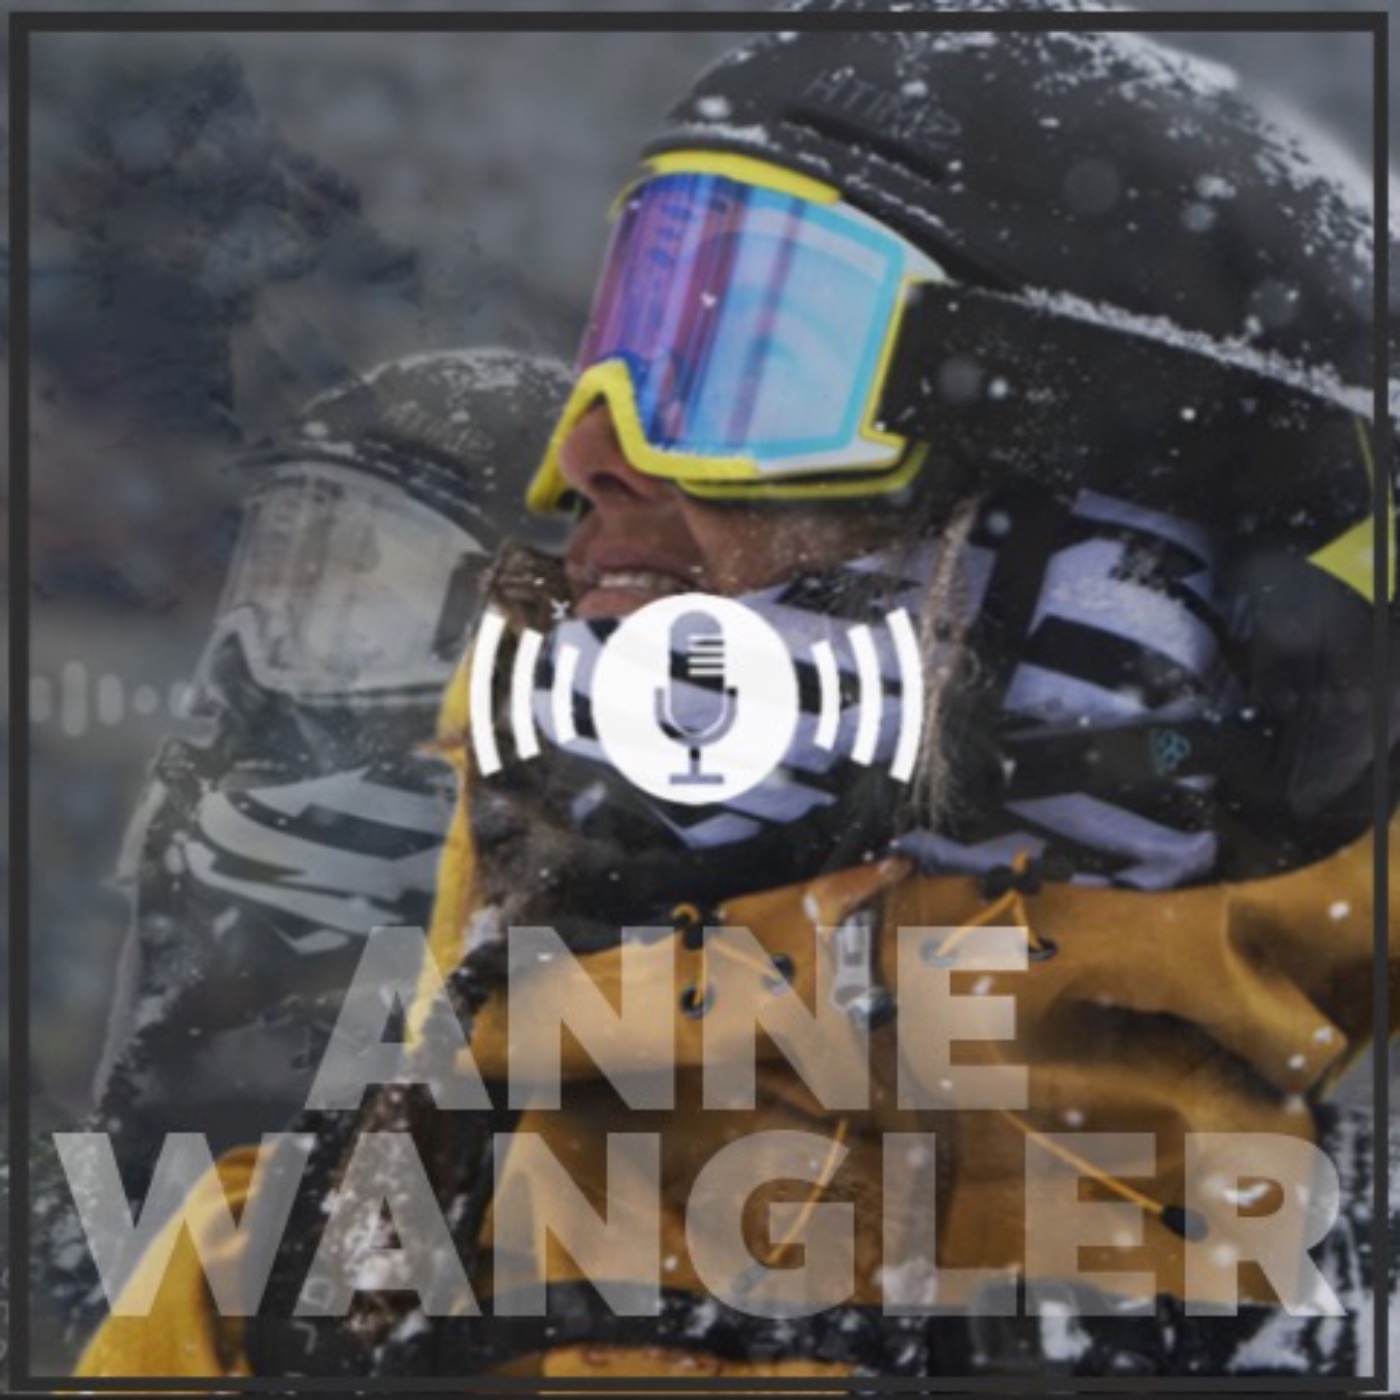 Anne Wangler - Resilience & Recovery